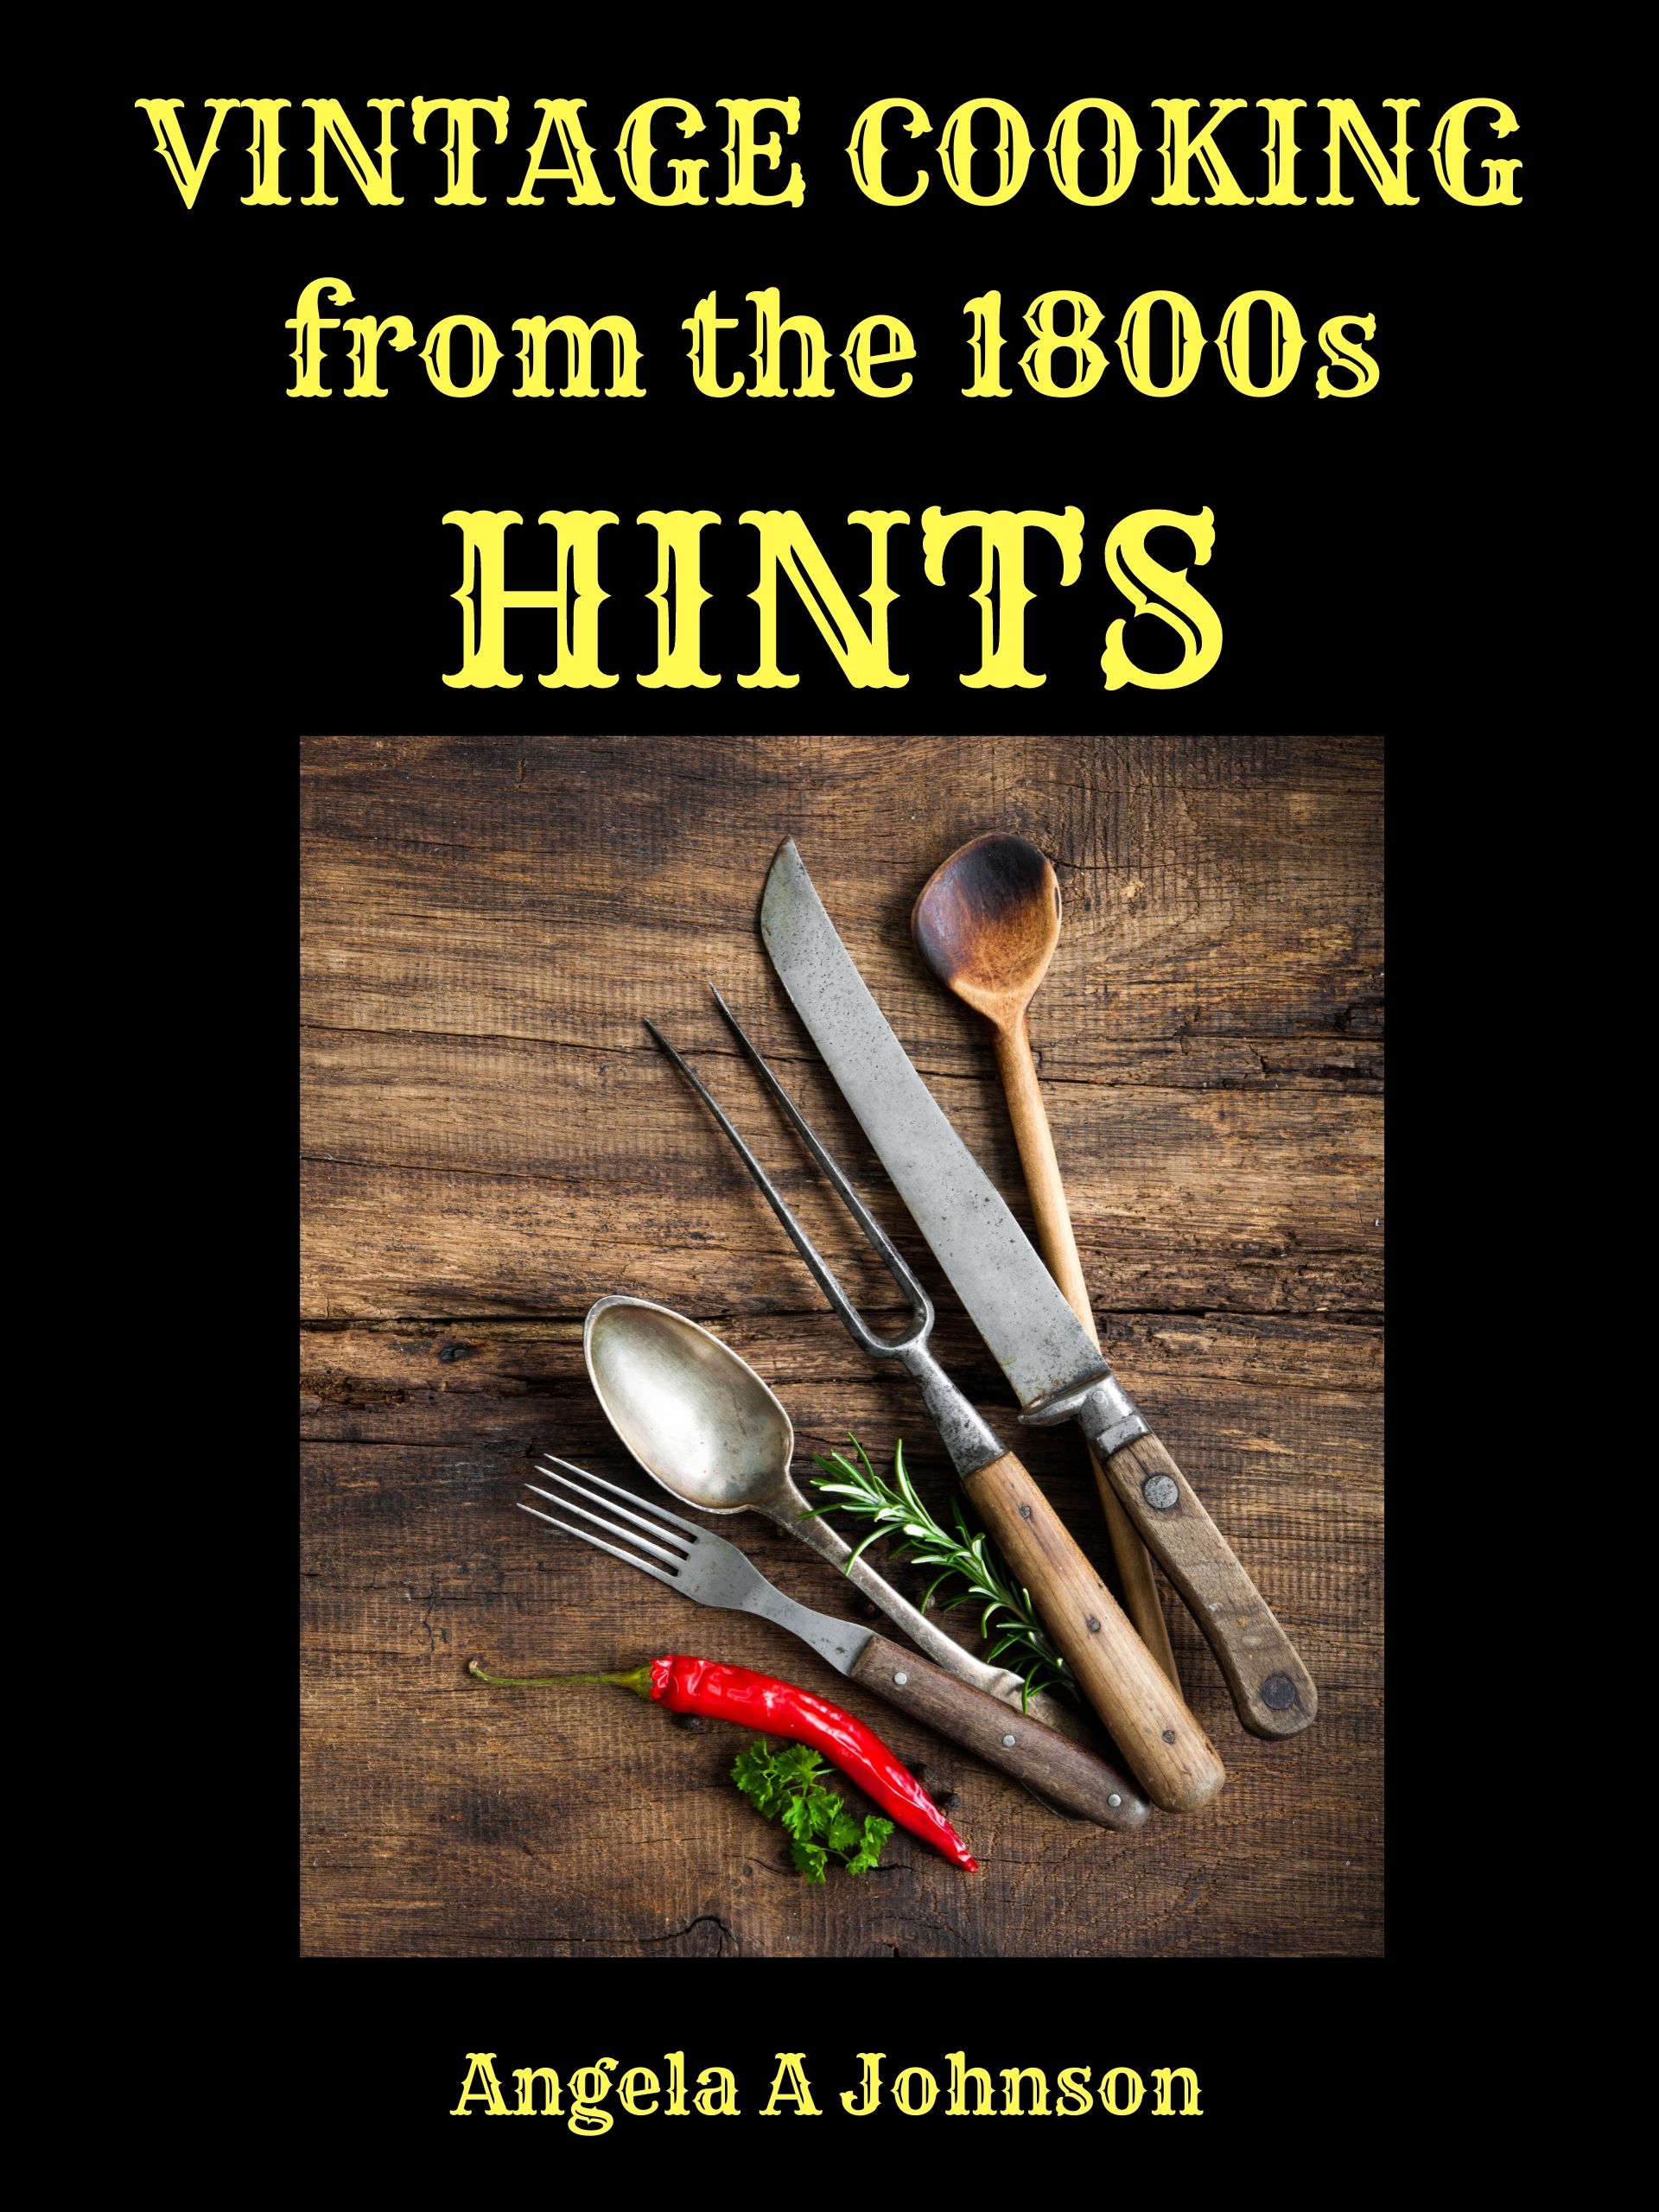 Vintage Cooking from the 1800s - Hints